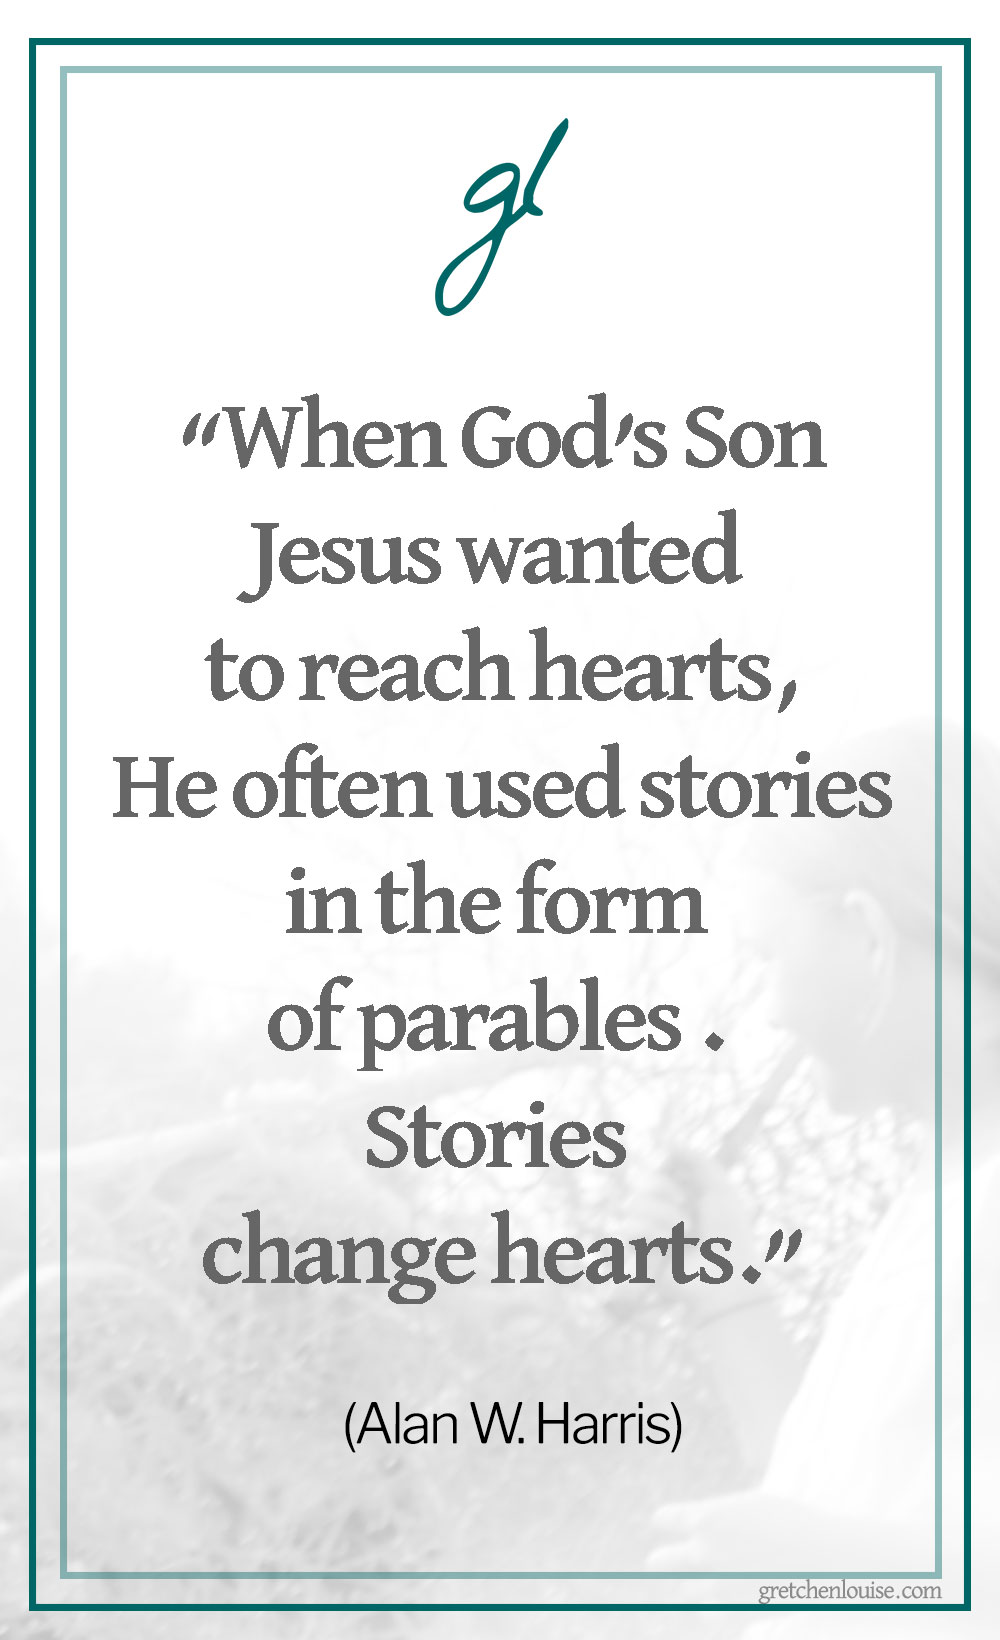 “When God’s Son Jesus wanted to reach hearts, He often used stories in the form of parables to do just that. Stories change hearts.” (Alan W. Harris discussing Teaching Through Storytelling)